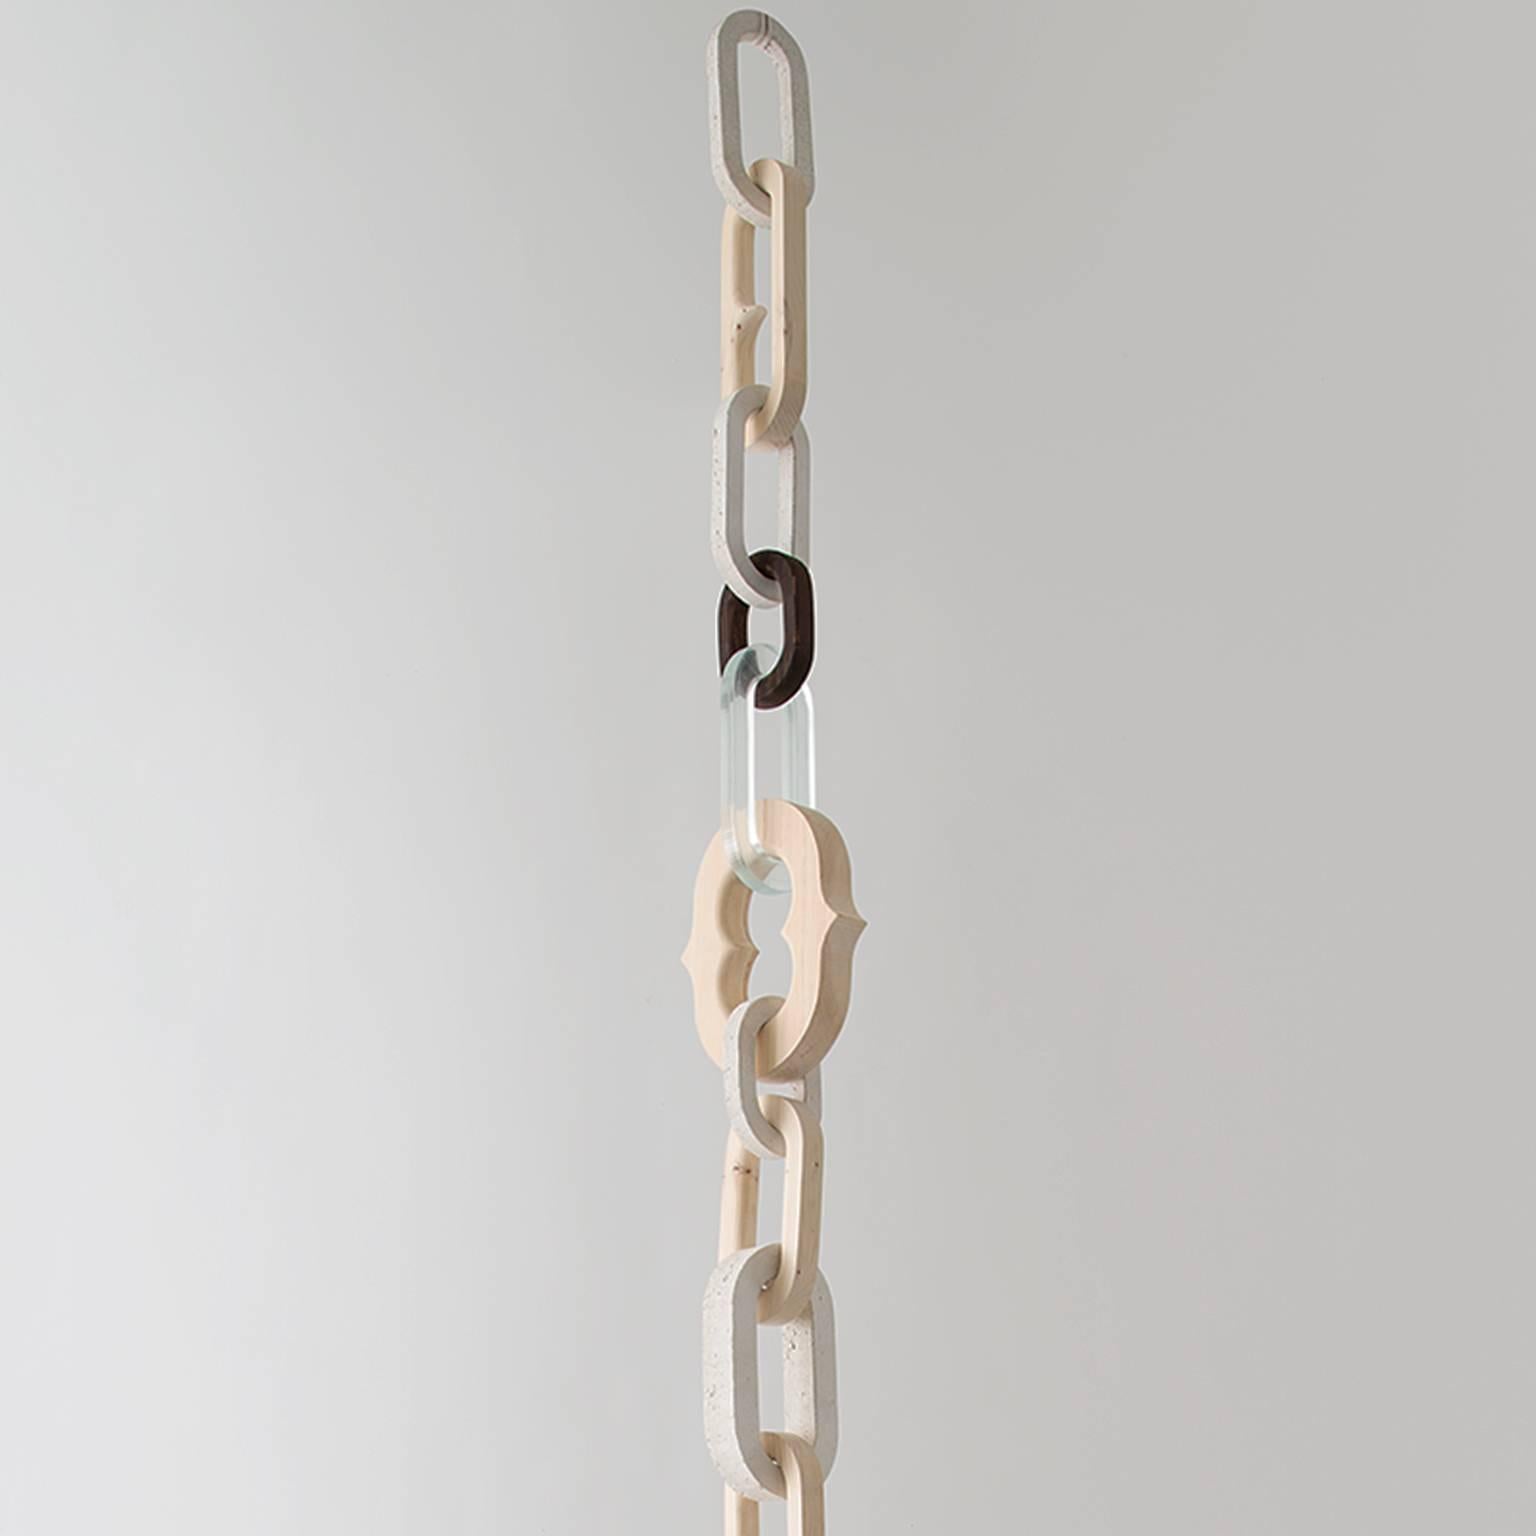 Carved Twelve Foot Long Hanging Chain Sculpture in Concrete, Resin and Wood - IN STOCK For Sale